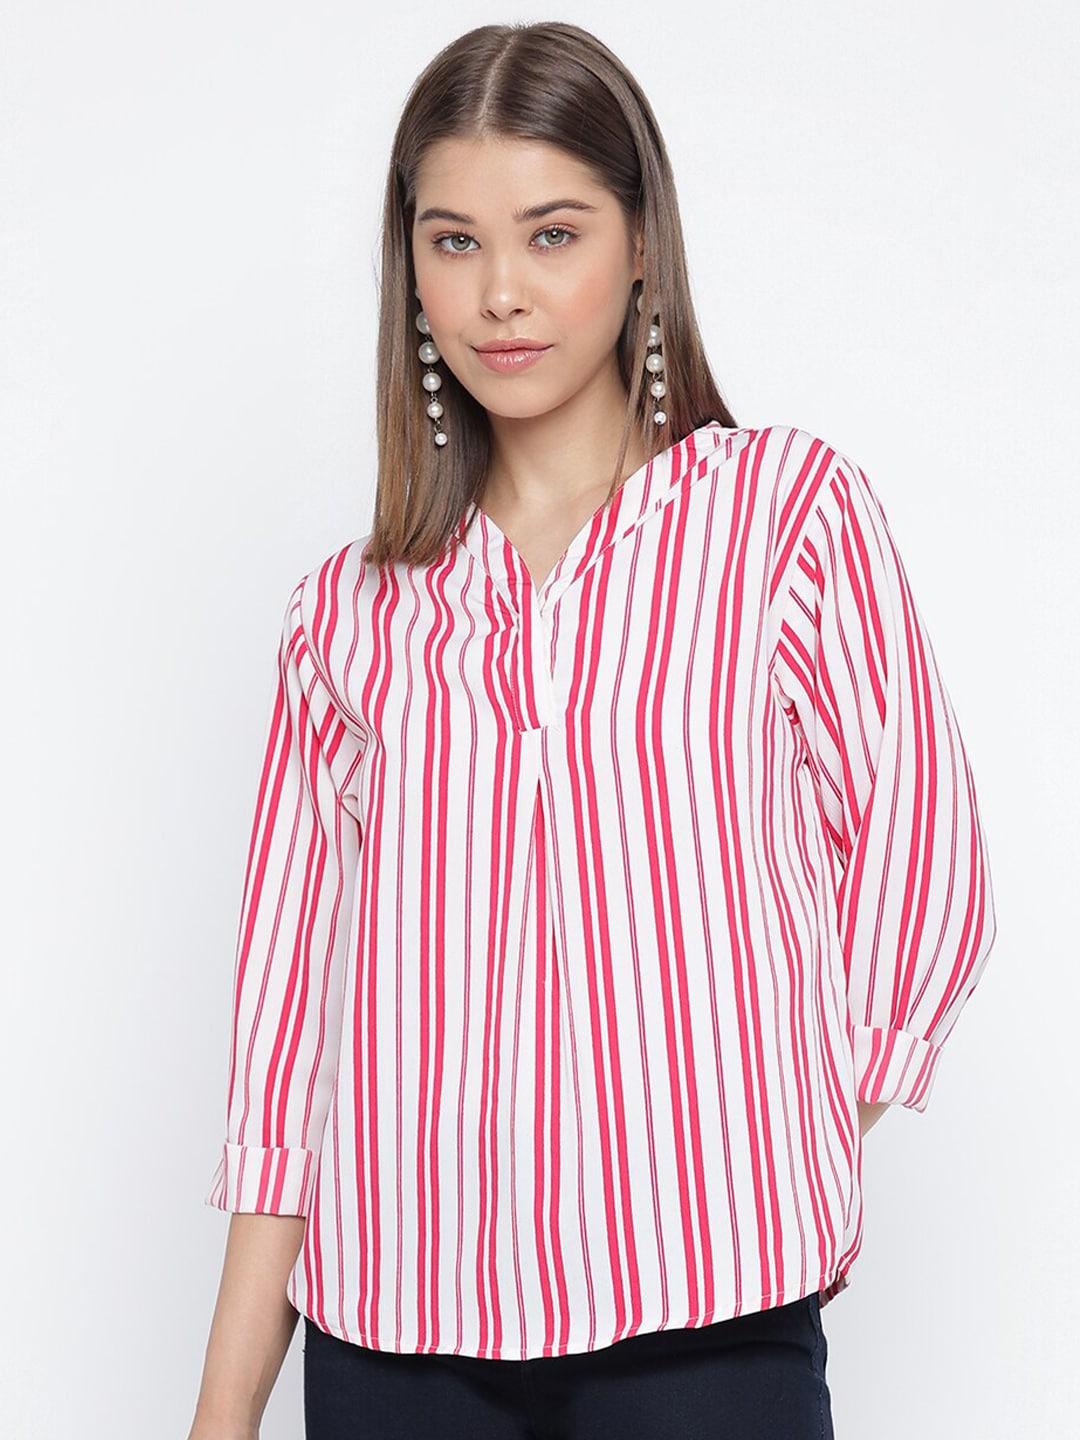 mayra-vertical-striped-shirt-style-top